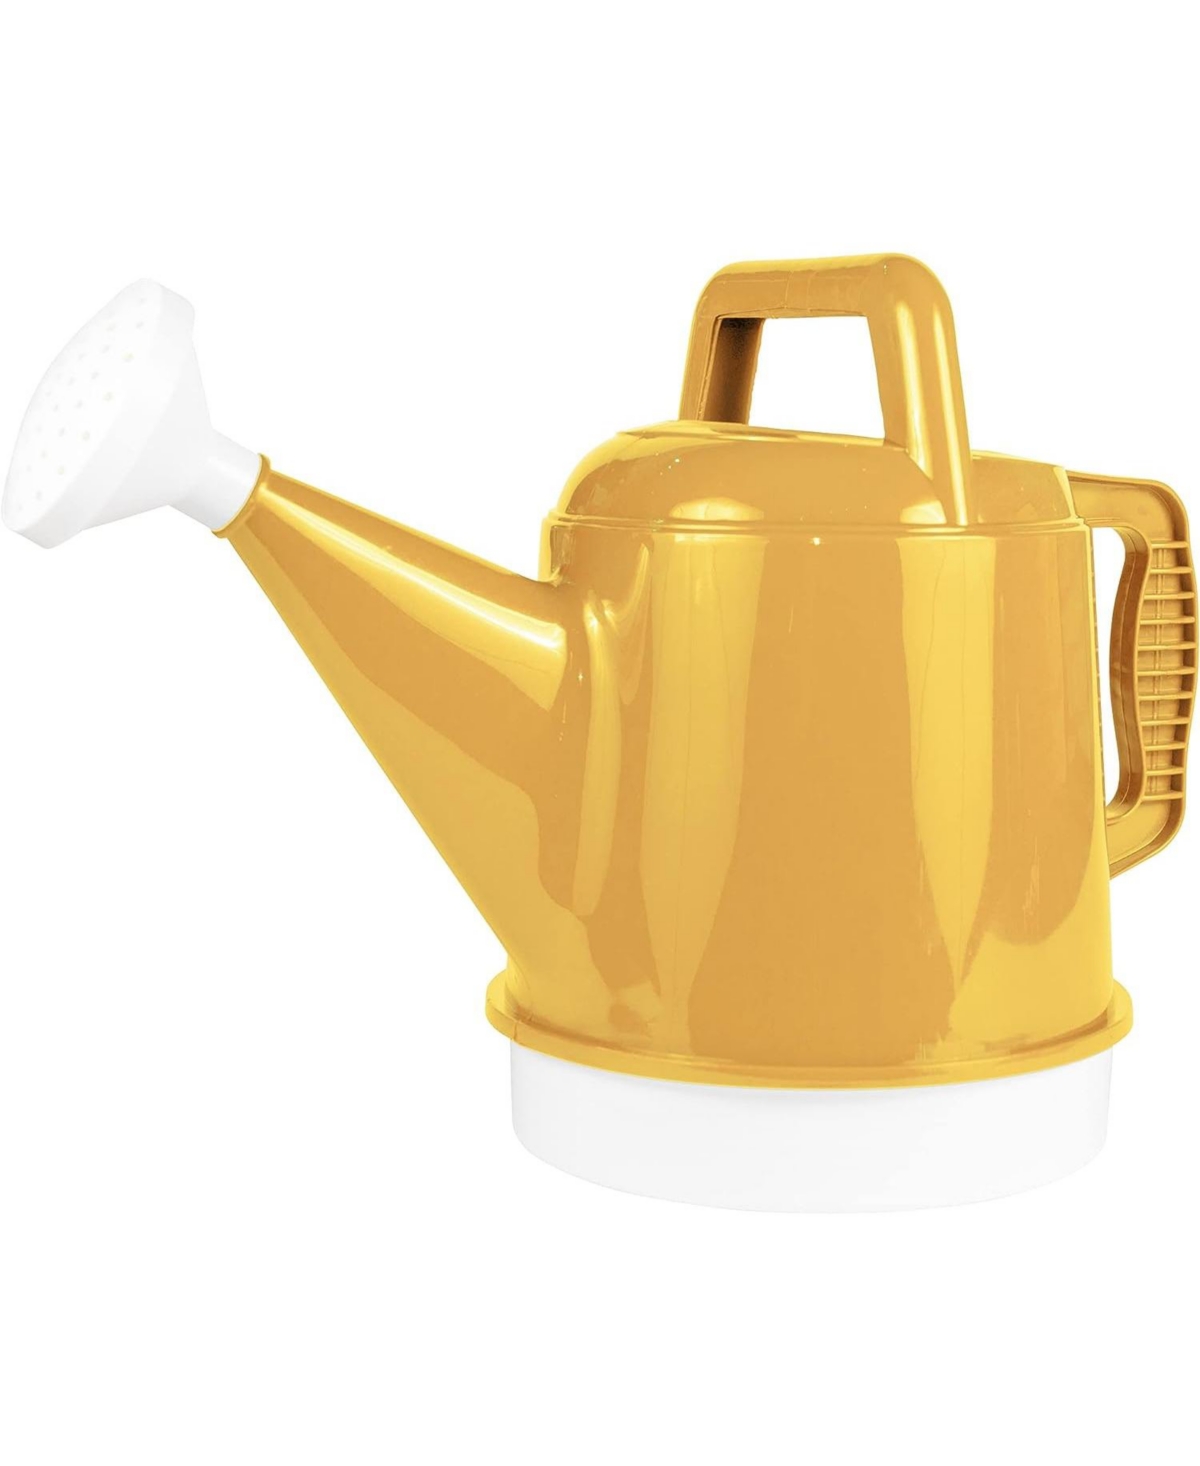 Deluxe Plastic Watering Can, Earthy Yellow, 2.5 Gallon Capacity - Yellow